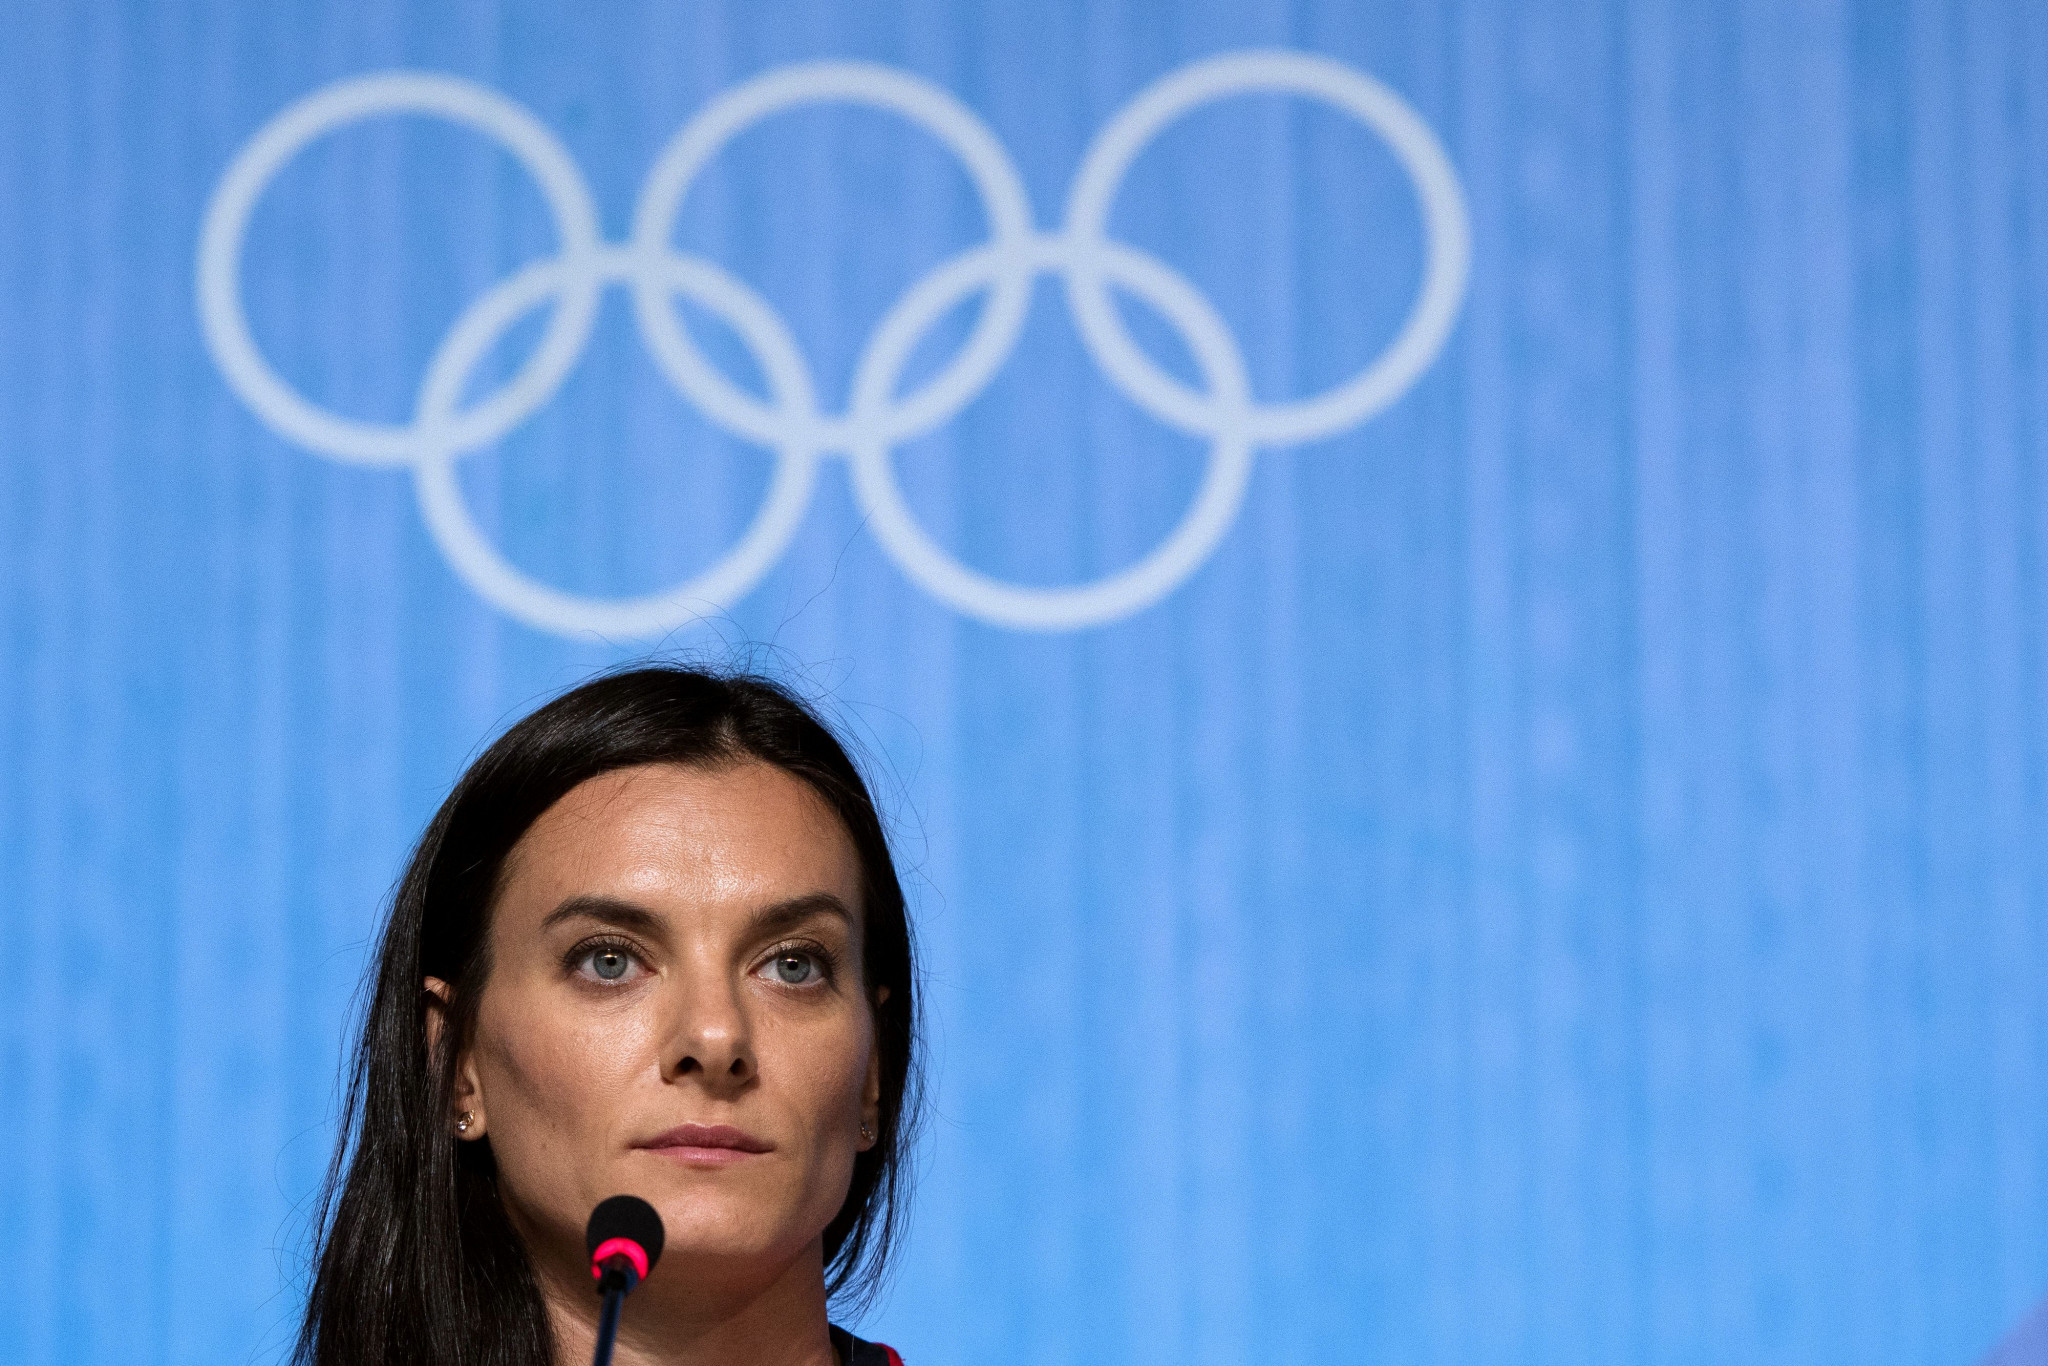 Two-time Olympic pole vault gold medallist Yelena Isinbayeva is one of two Russian members of the IOC ©Getty Images